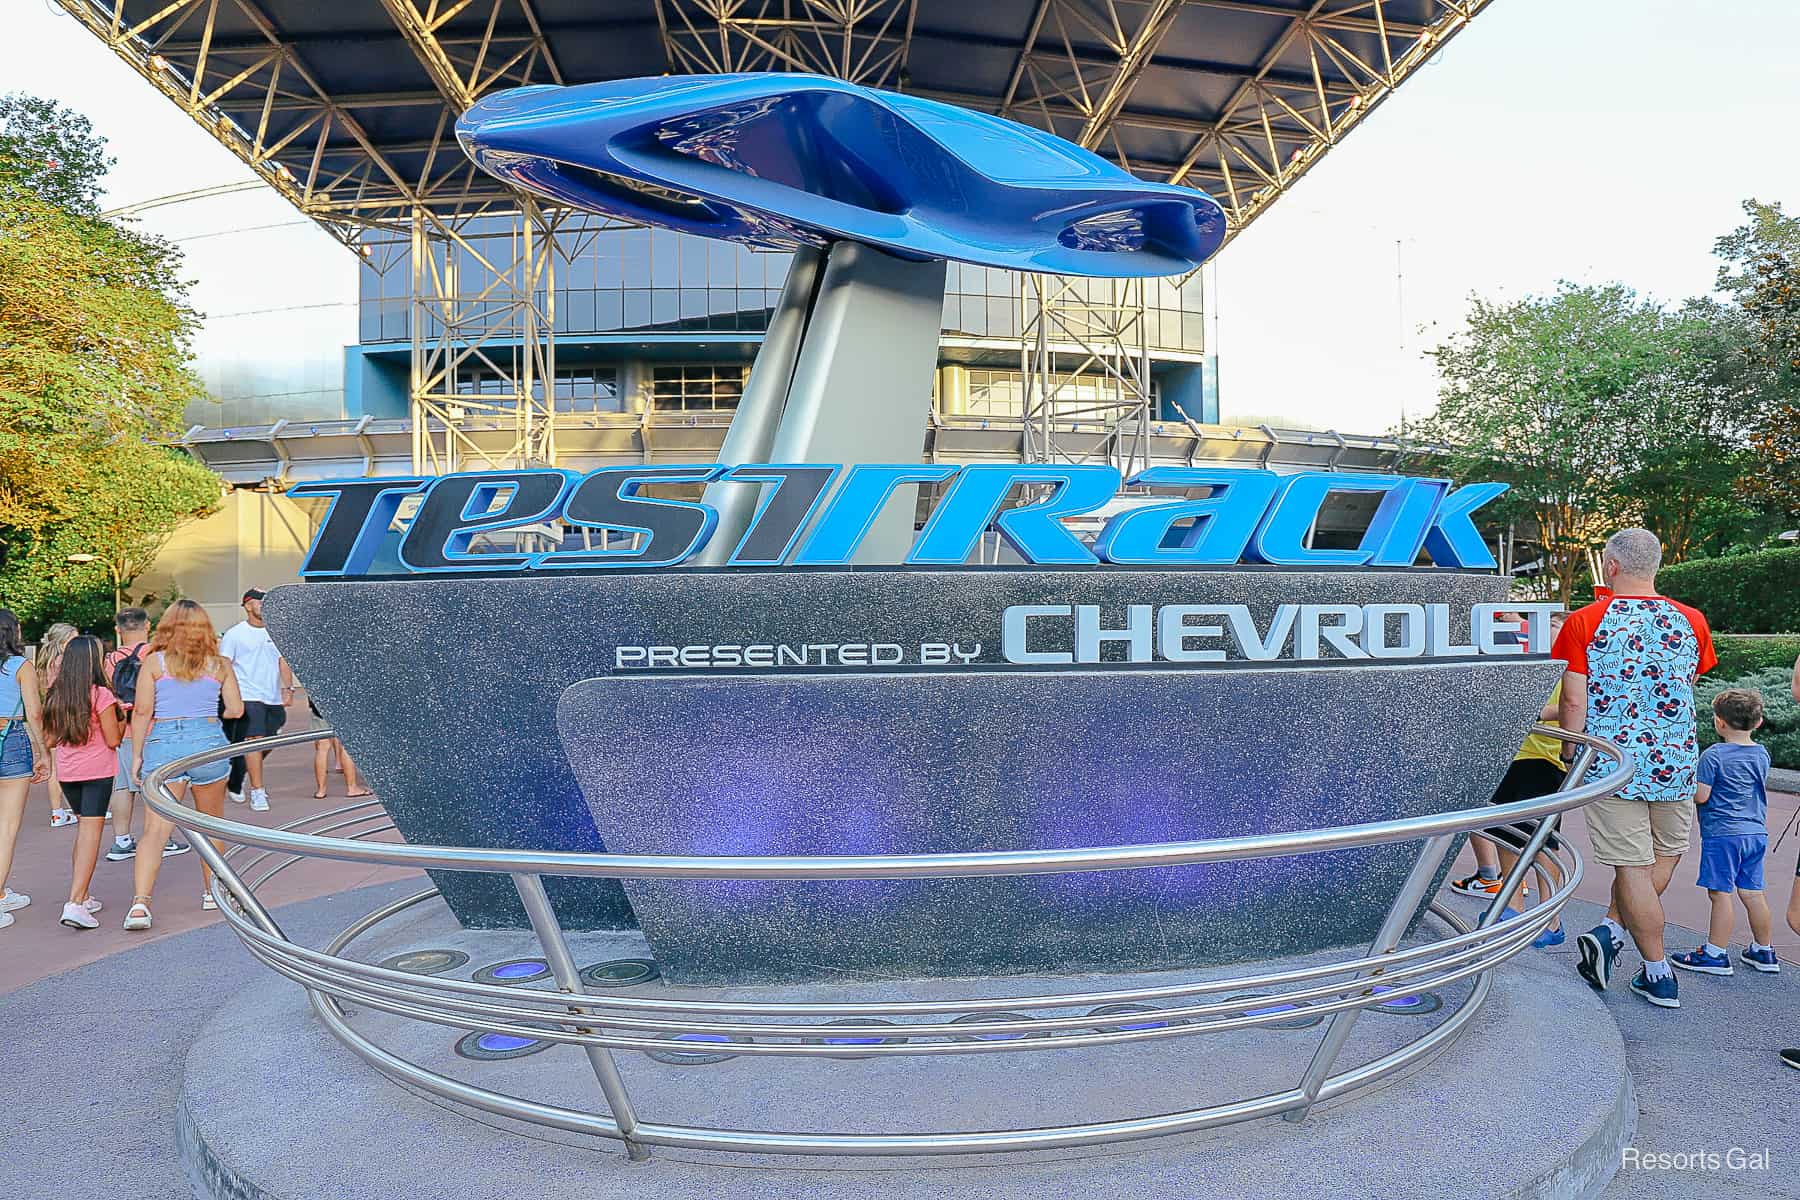 Test Track Marquee says Presented by Chevrolet 